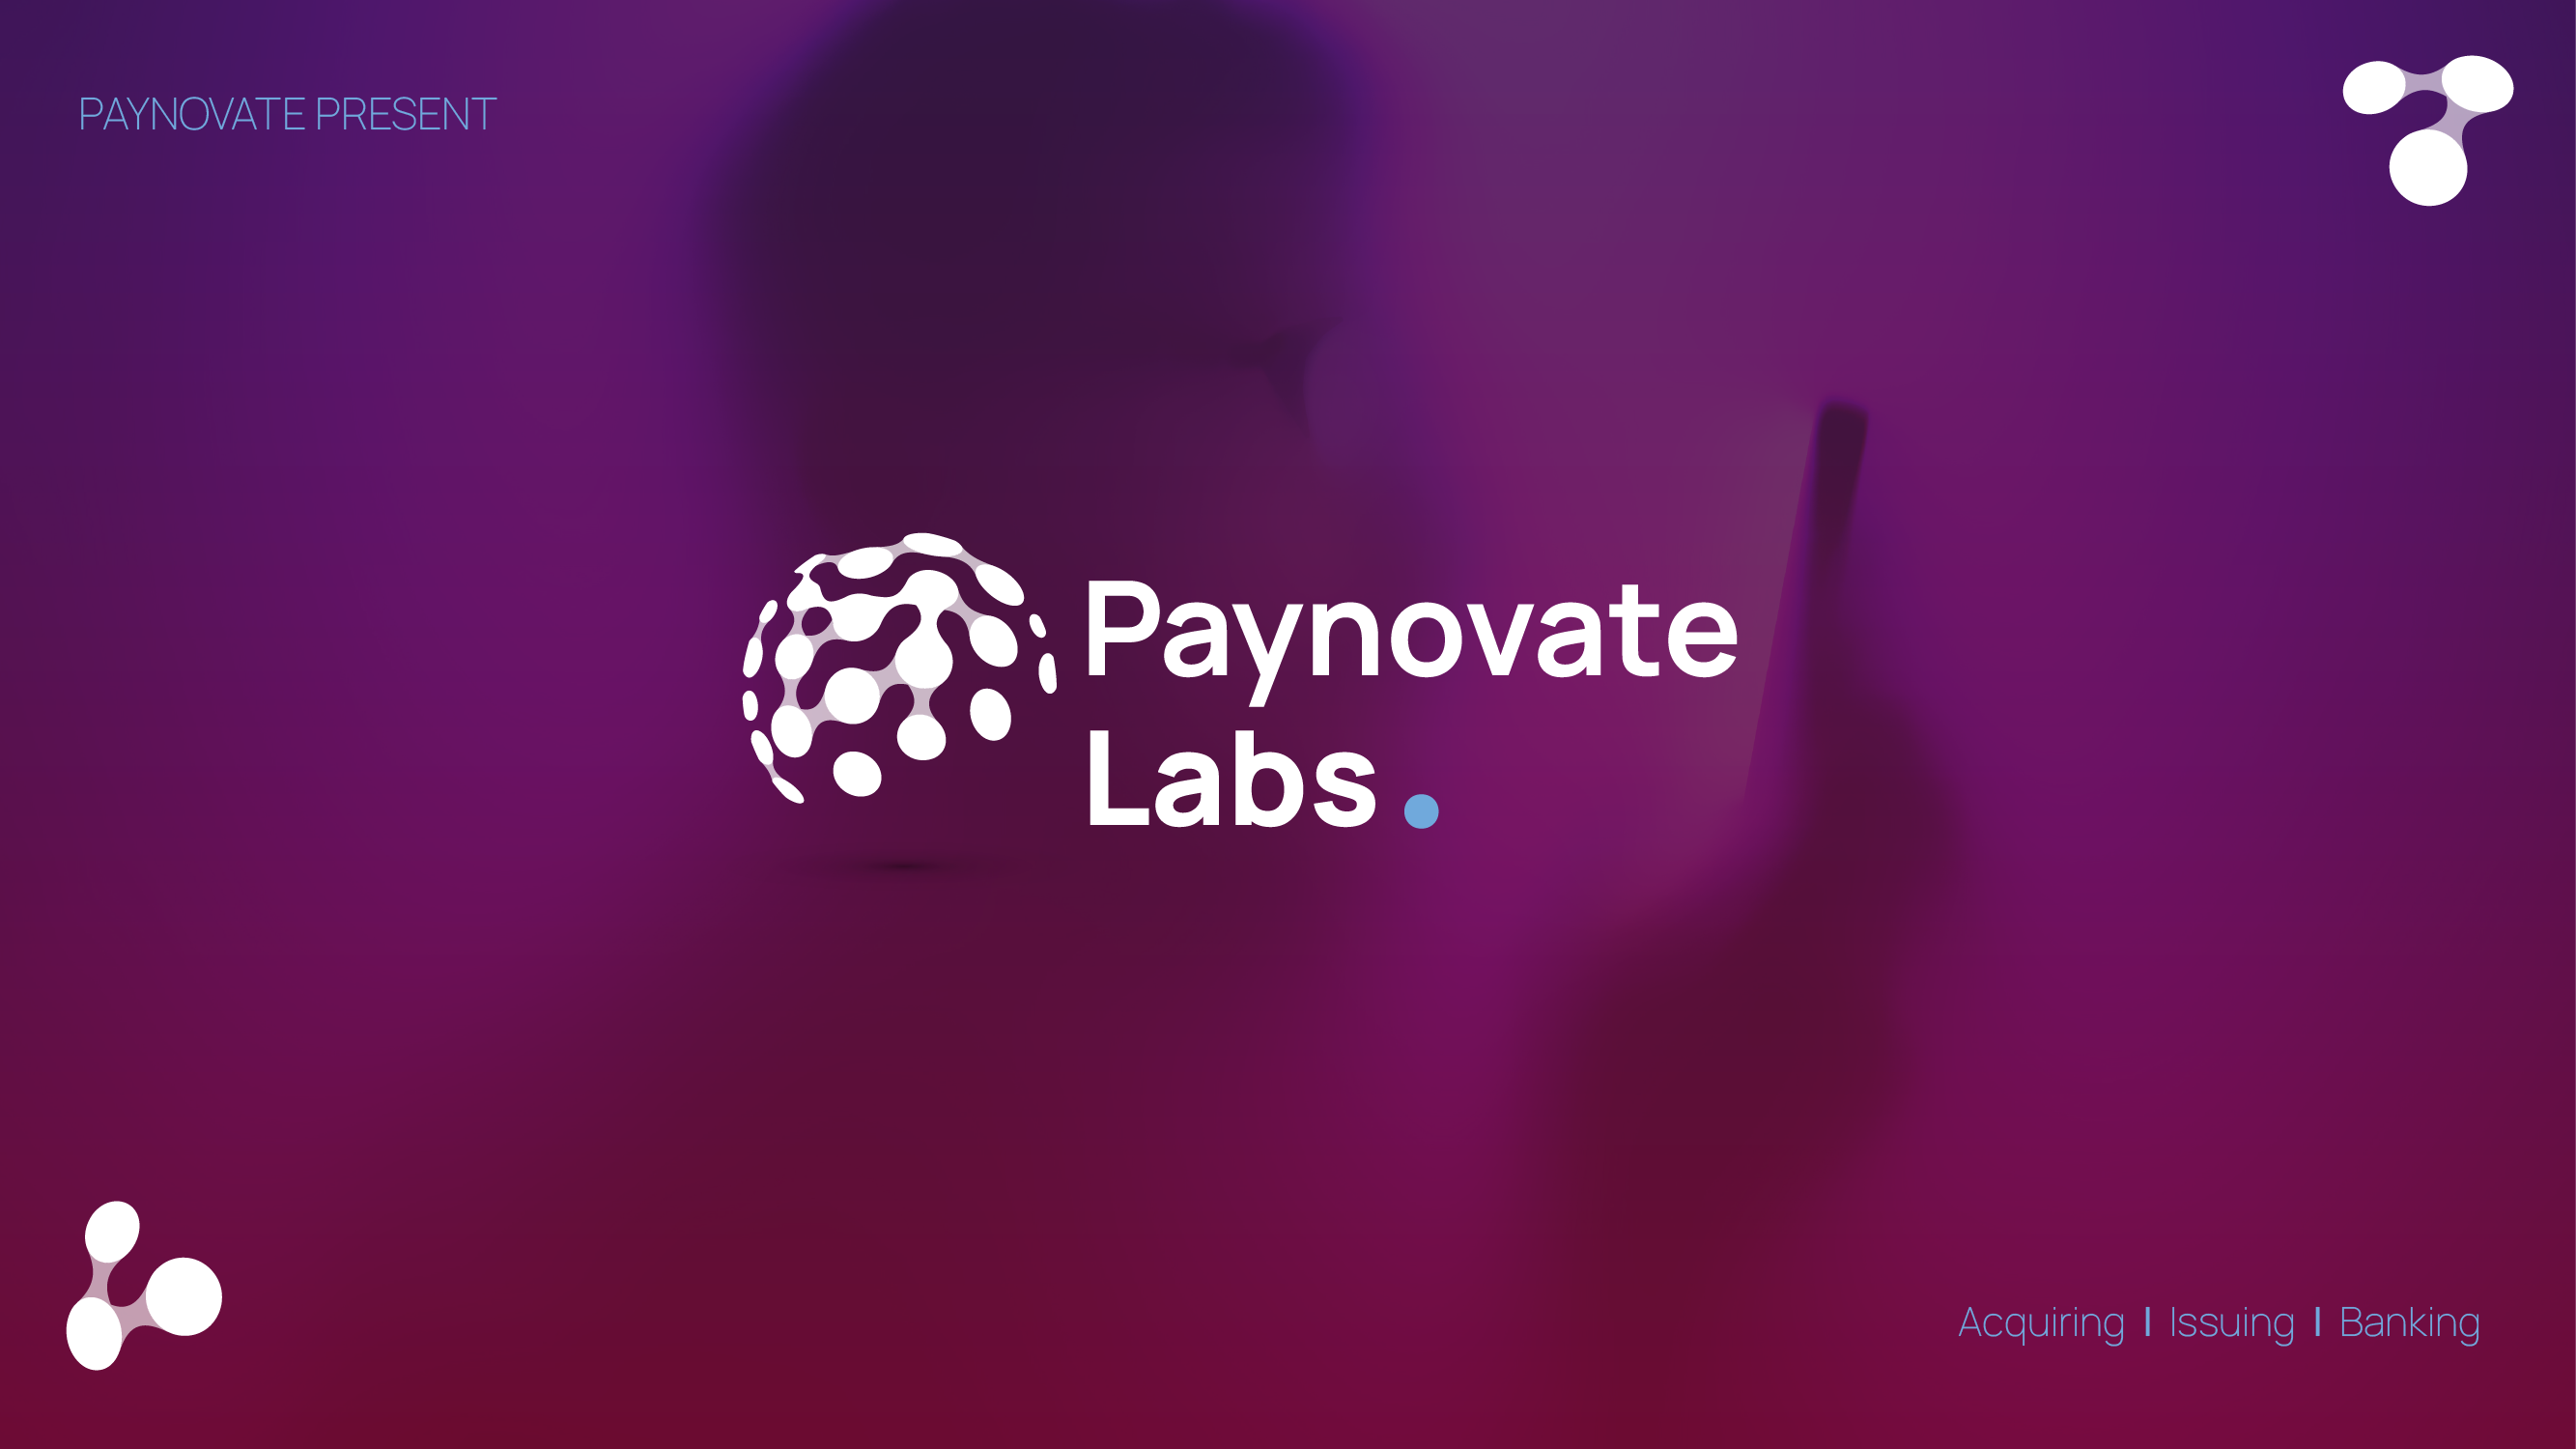 Paynovate Labs